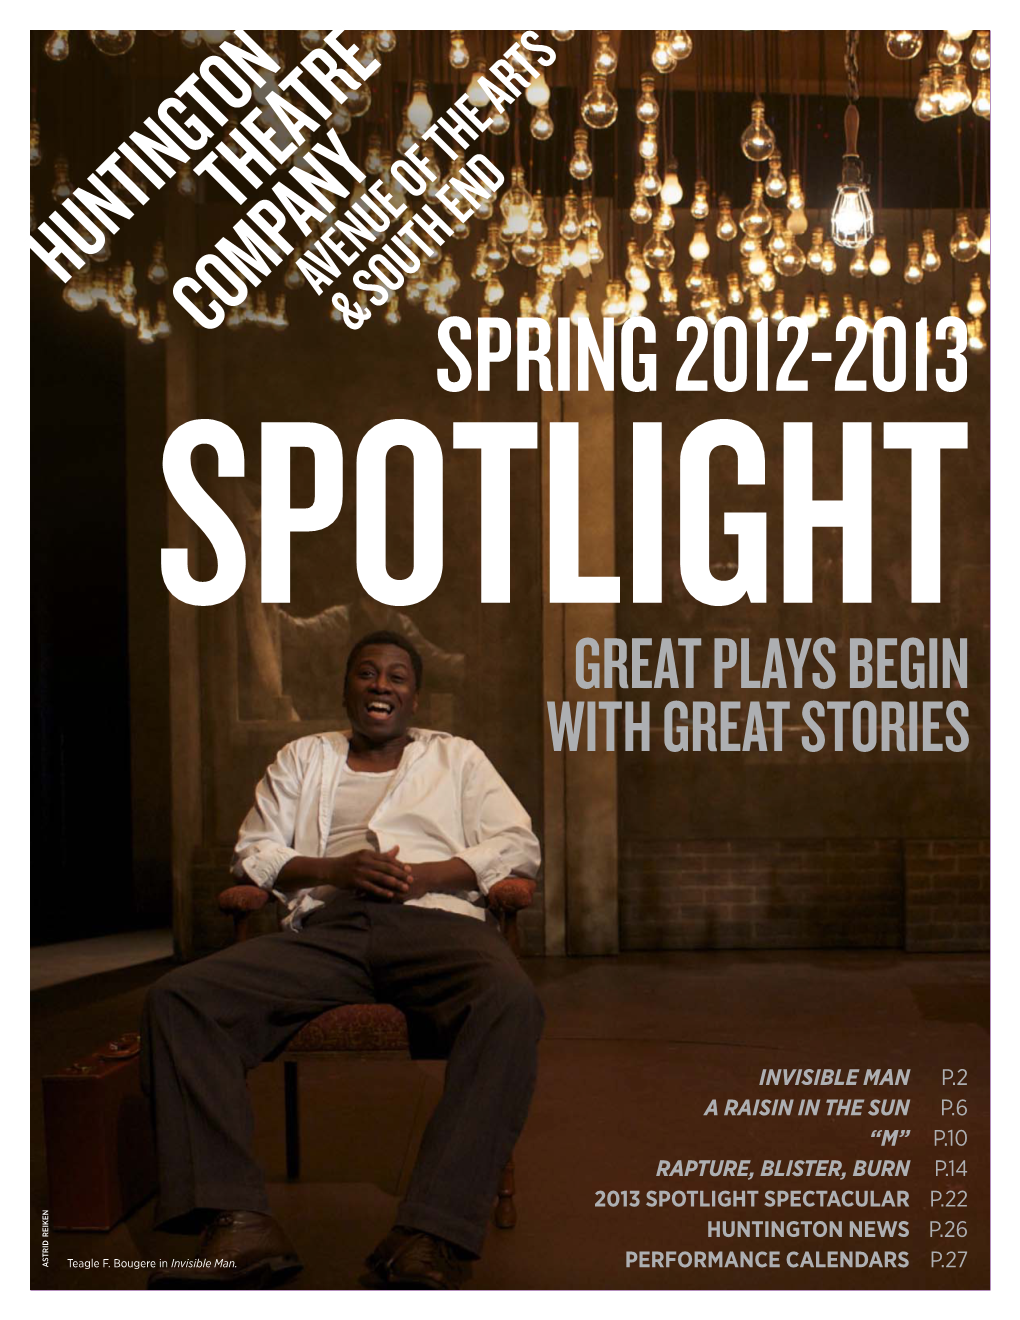 Spring 2012-2013 Spotlight Great Plays Begin with Great Stories